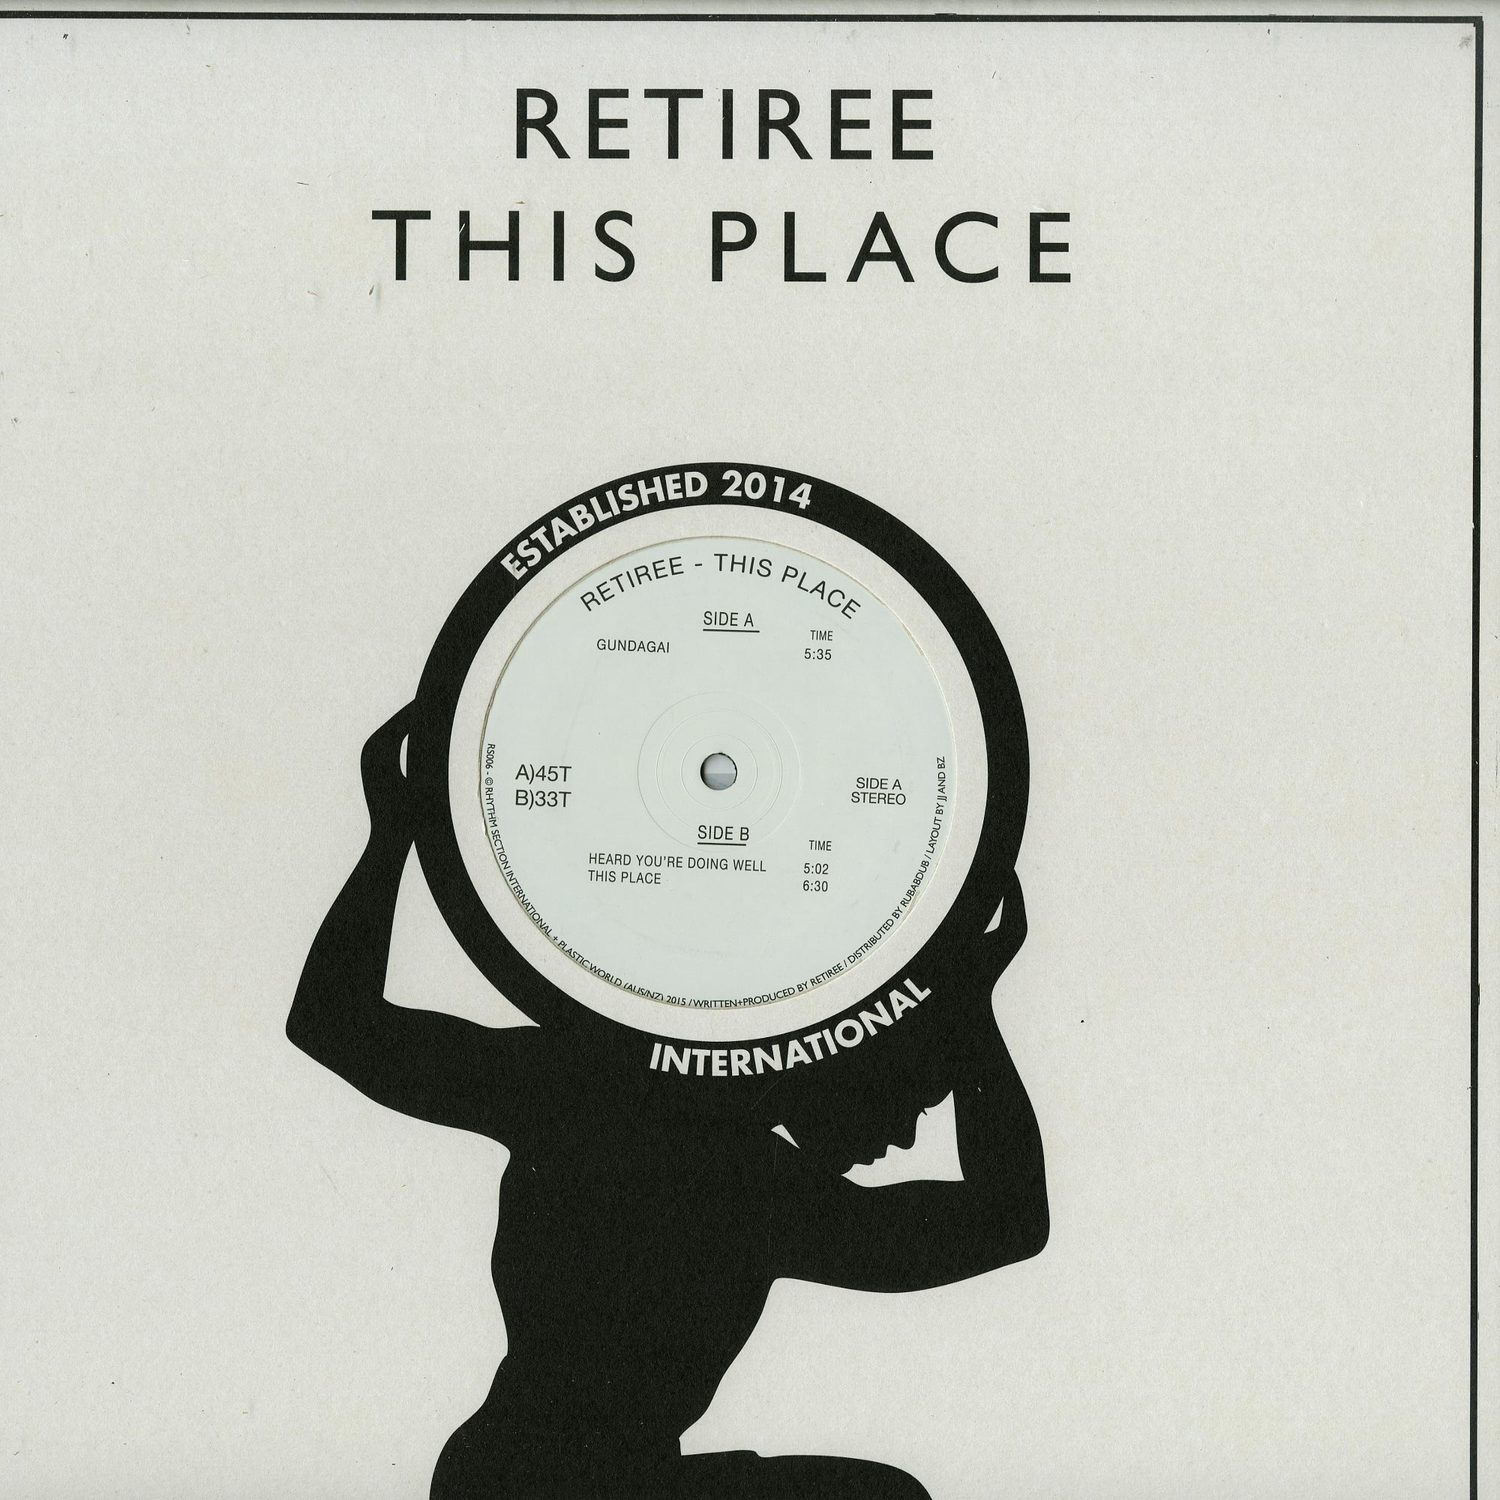 Retiree - THIS PLACE